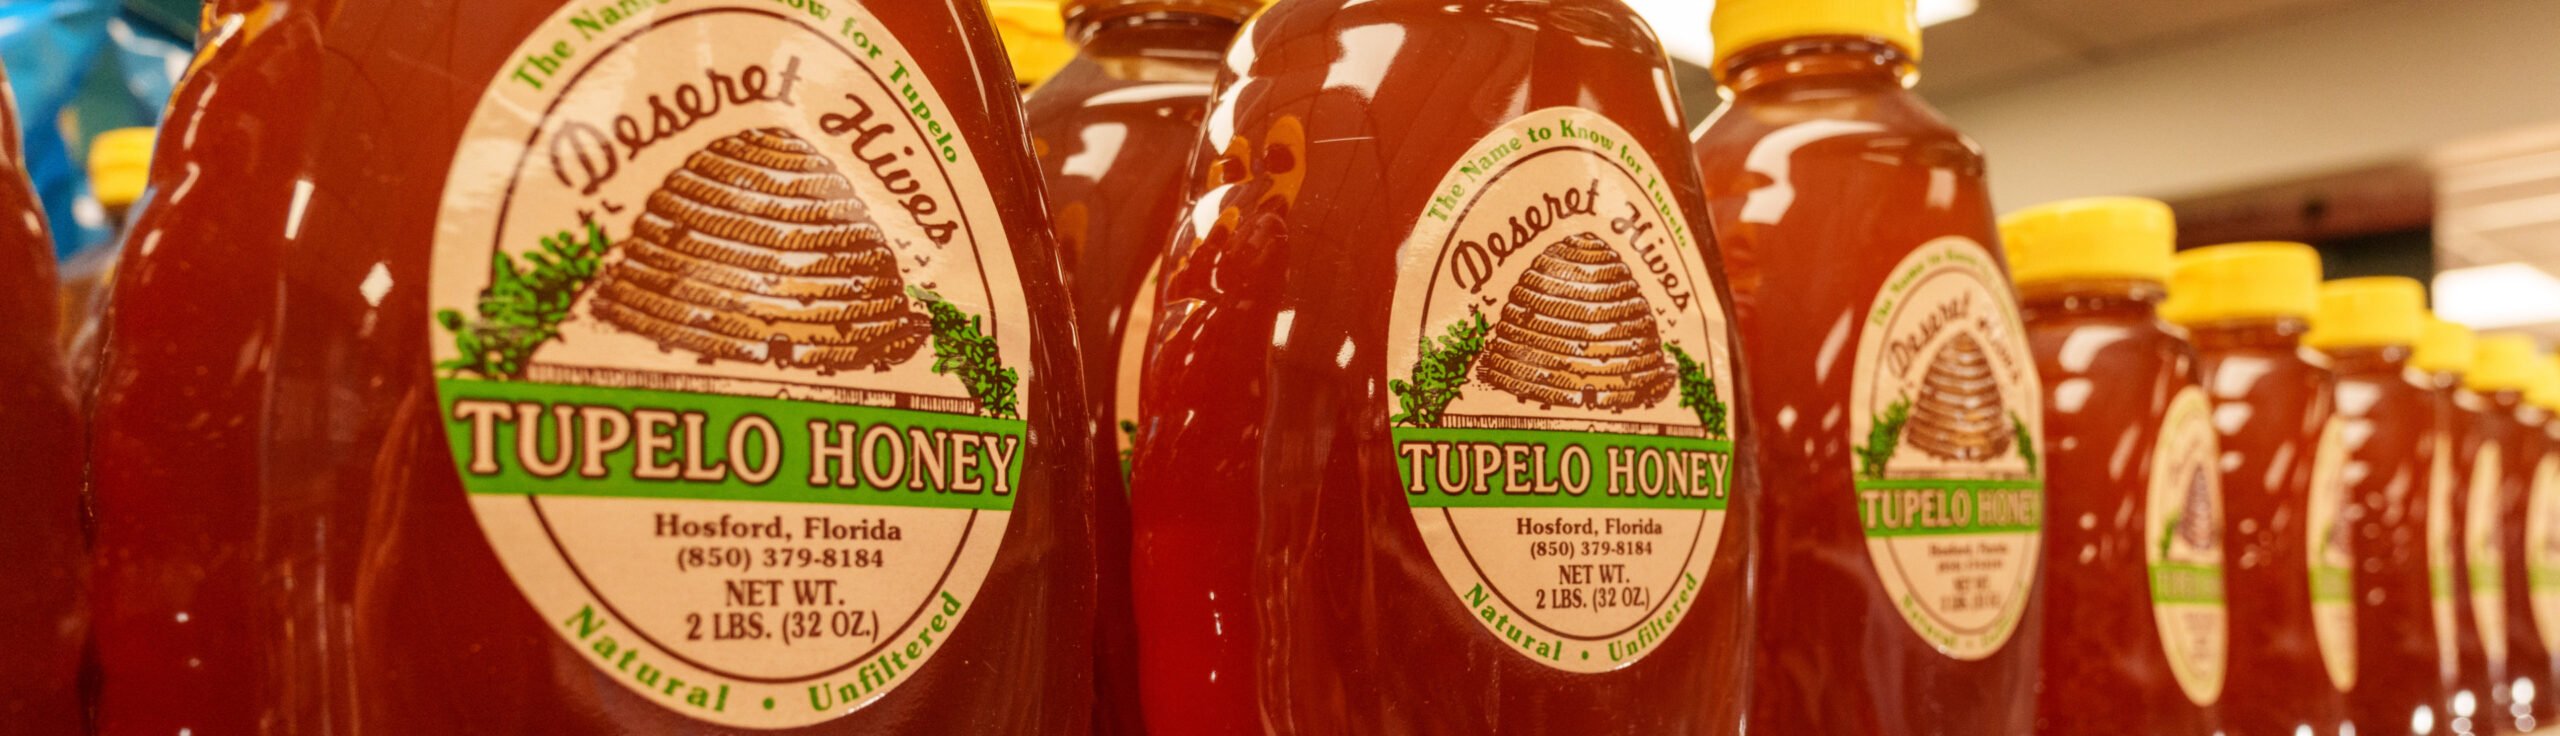 Tupelo Honey at Piggly Wiggly